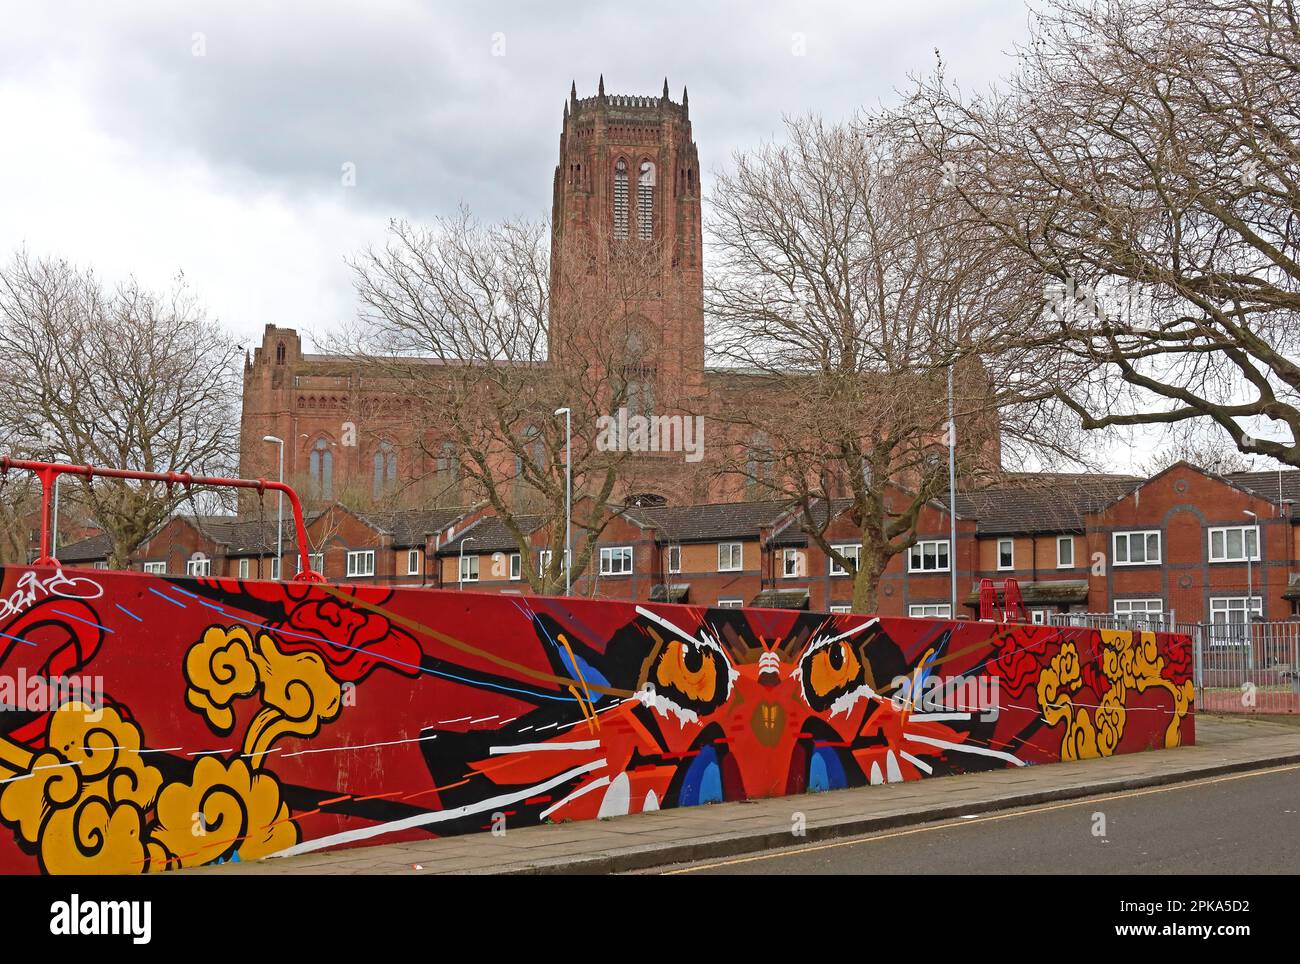 View of Anglican cathedral from Chinatown, 29 ,Great George Street,, Liverpool, Merseyside, England, UK,  L1 5DZ Stock Photo